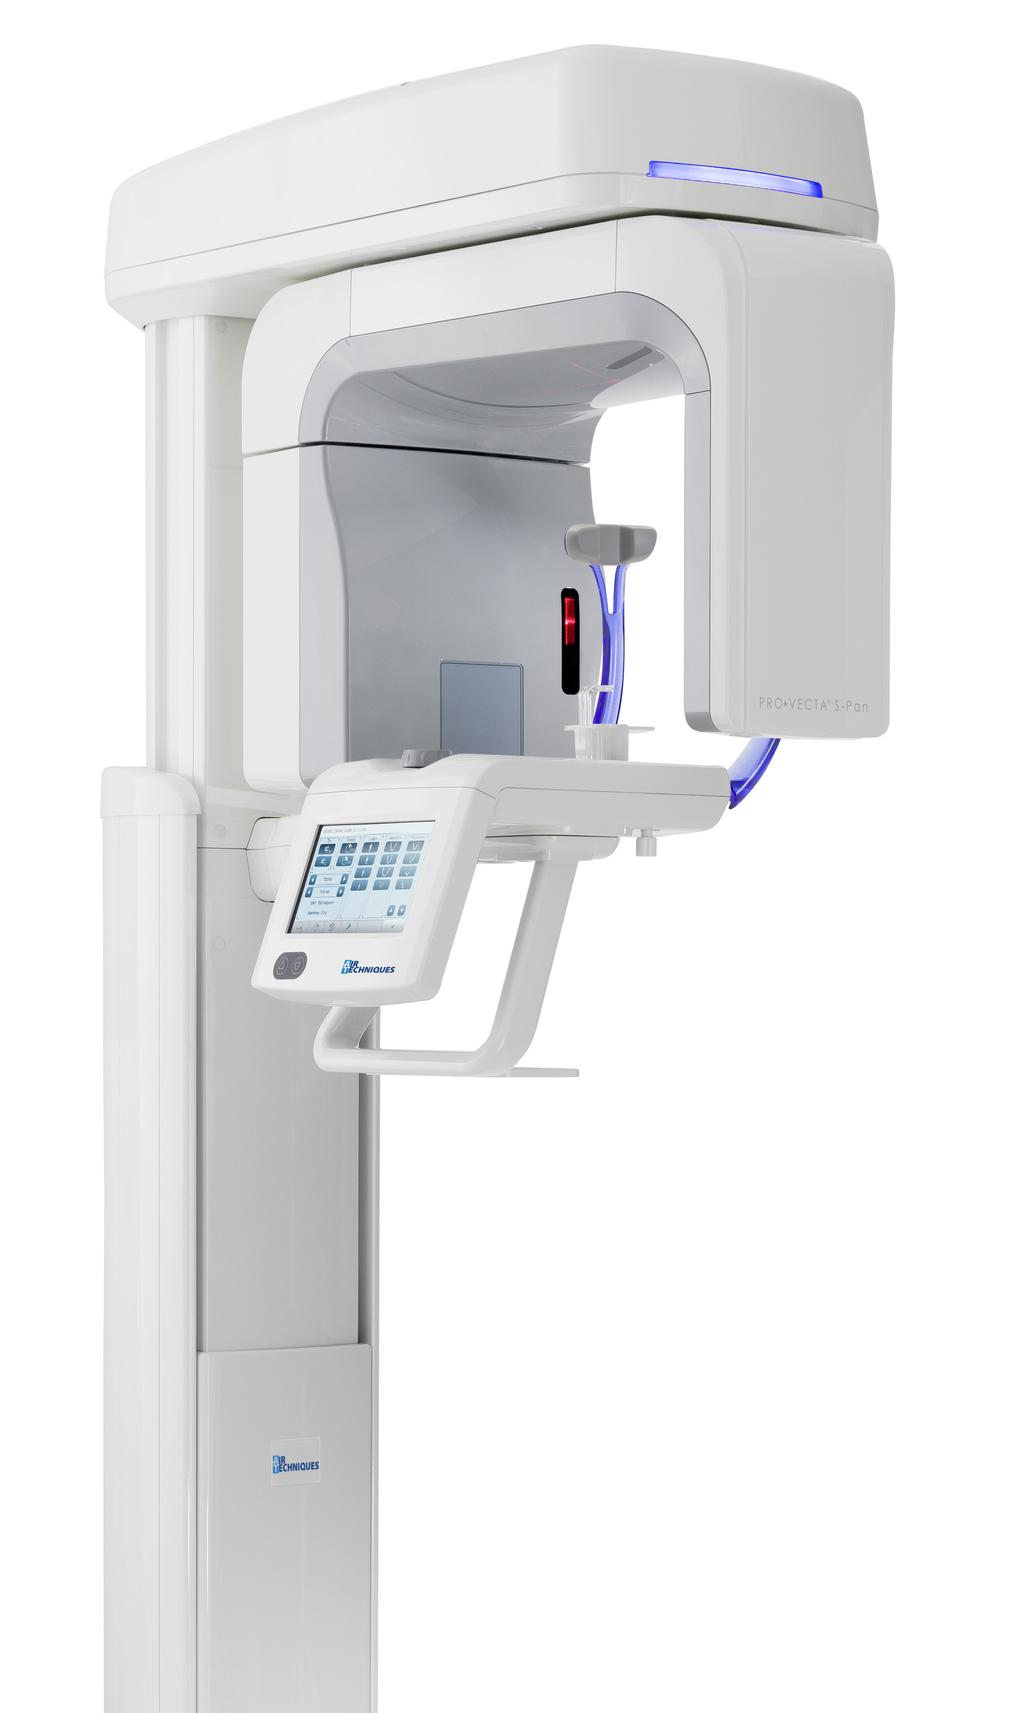 ProVecta S-Pan truly perfect imaging High-speed scanning with low X-ray dose All functions at a glance The intuitive 7 touch display visualizes all settings quickly and clearly.